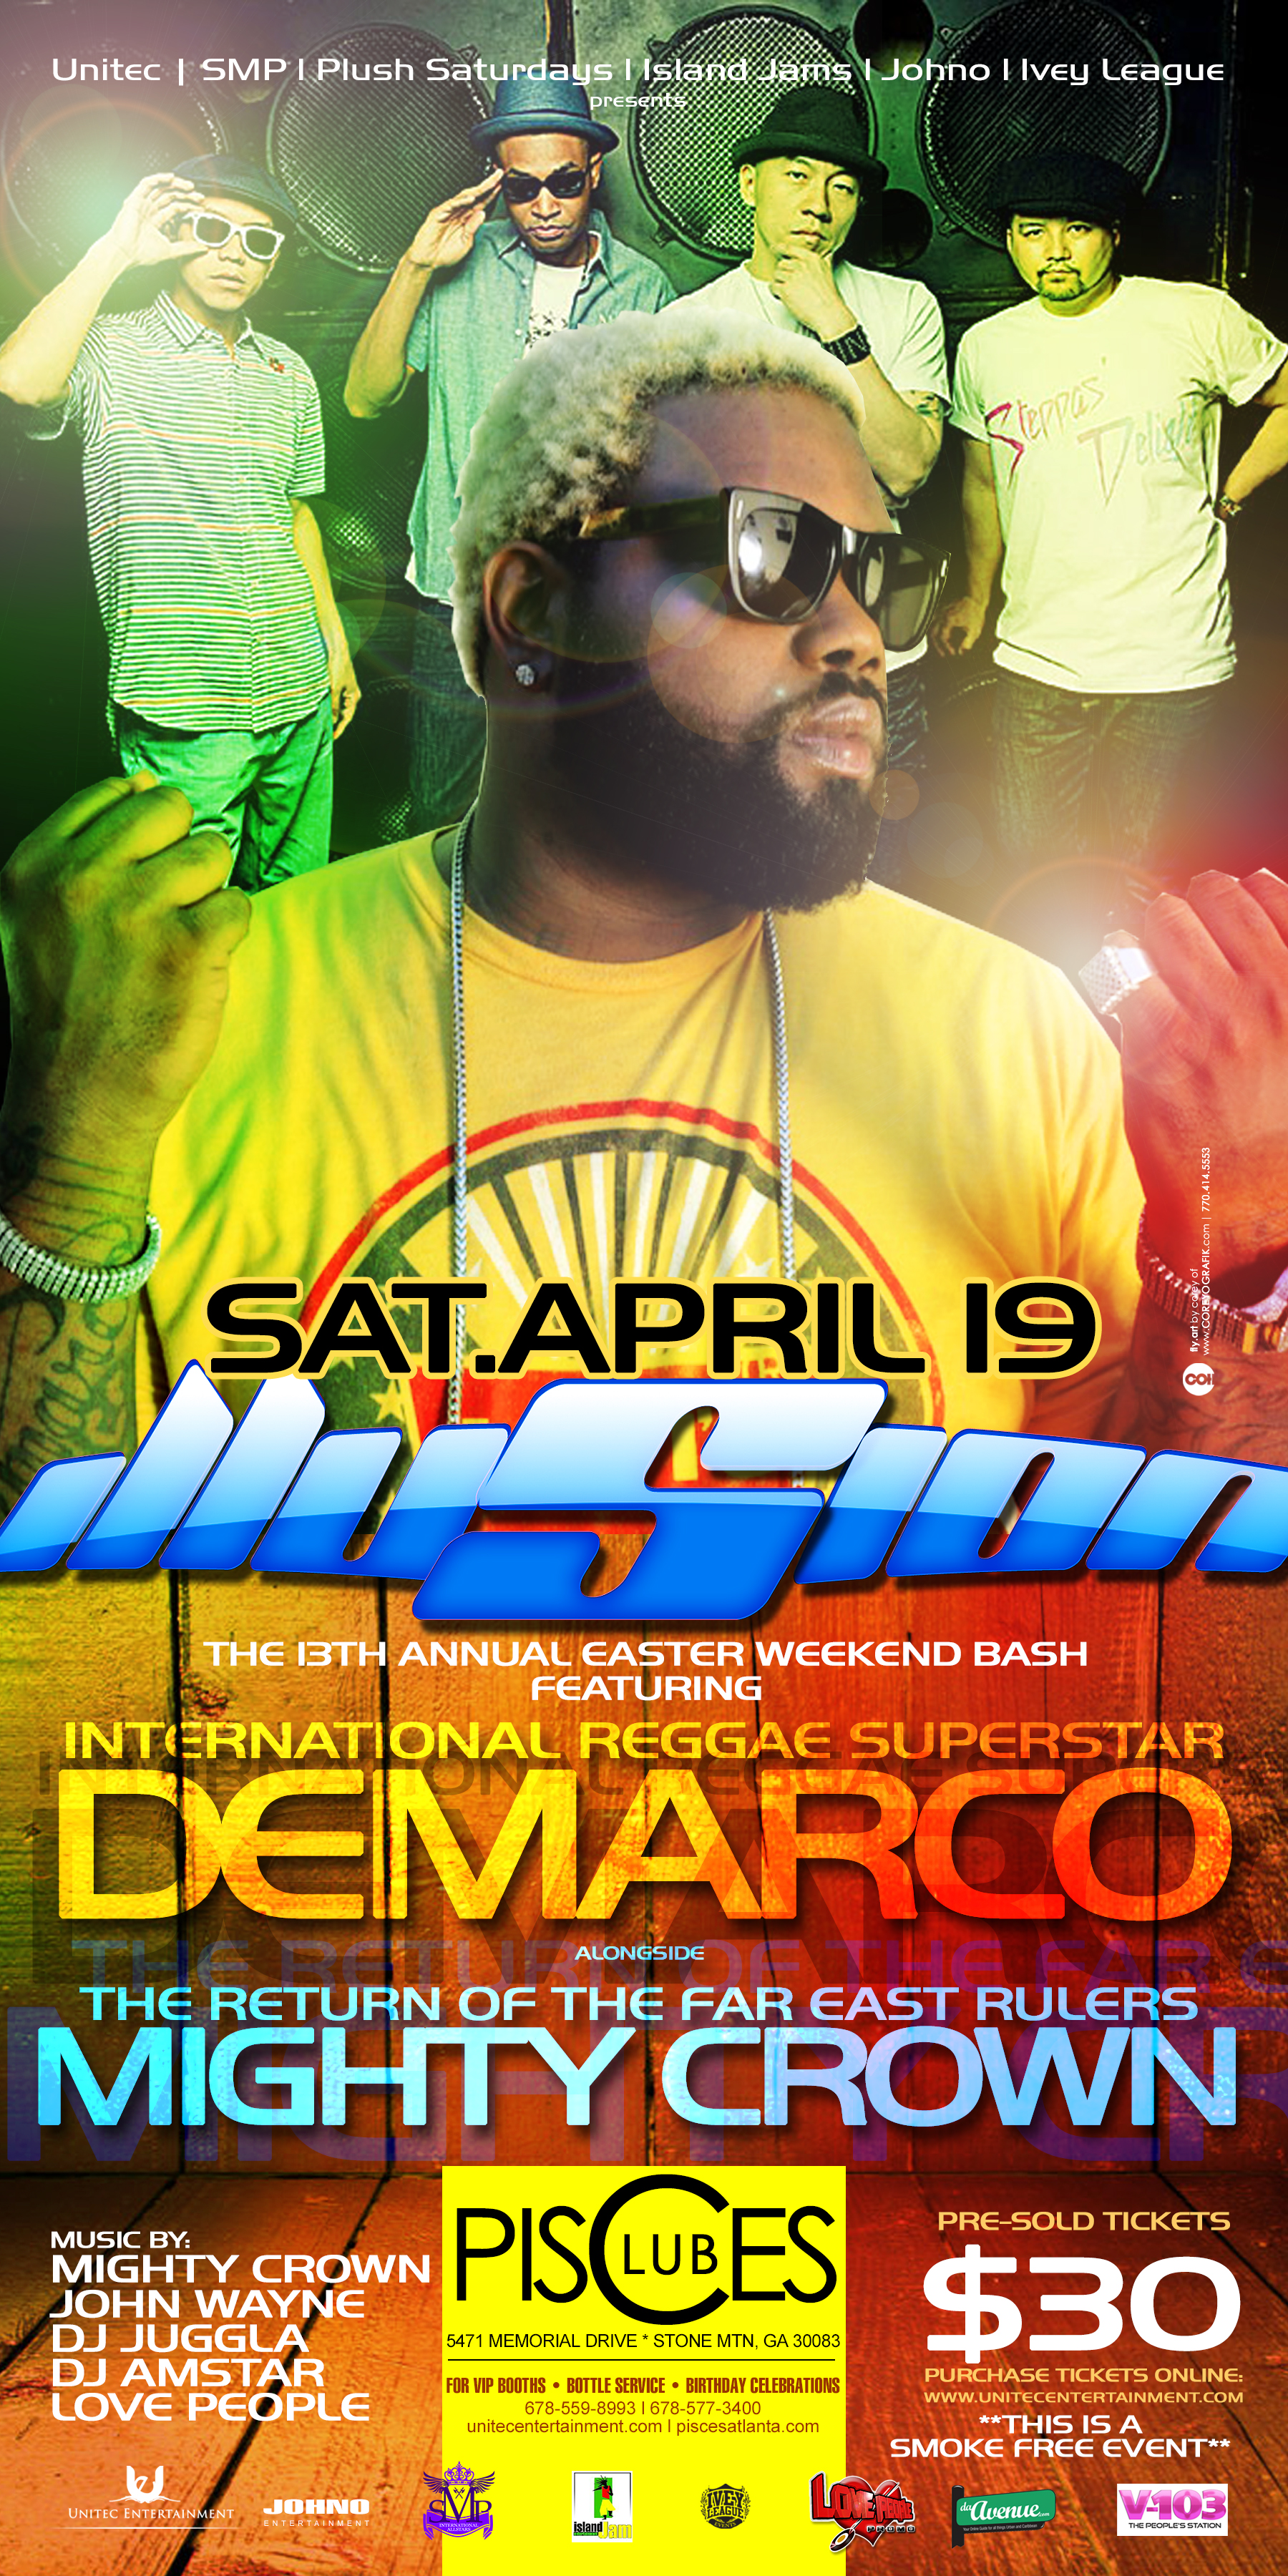 The 13th Annual Easter Weekend Bash ✨#ILLUSION✨ Starring @DemarcoDaDon Live in Concert + The Return of "The Far East Rulers" @MightyCrown on Sat. April 19th 2014 at @ClubPisces ▶️Music by #MightyCrown l @JohnWayneMovements @Jugglaatl l @DJChigga l #DJAMstar ▶️Get $30 Presold Tickets online: www.unitecentertainment.com ▶️For more info: 678-559-8993 or log on to www.unitecentertainment.com  #unitecevents #clubpisces #dancehall #reggae #demarco #illusion #mightycrown #atlantadancehall #atlantanightlife